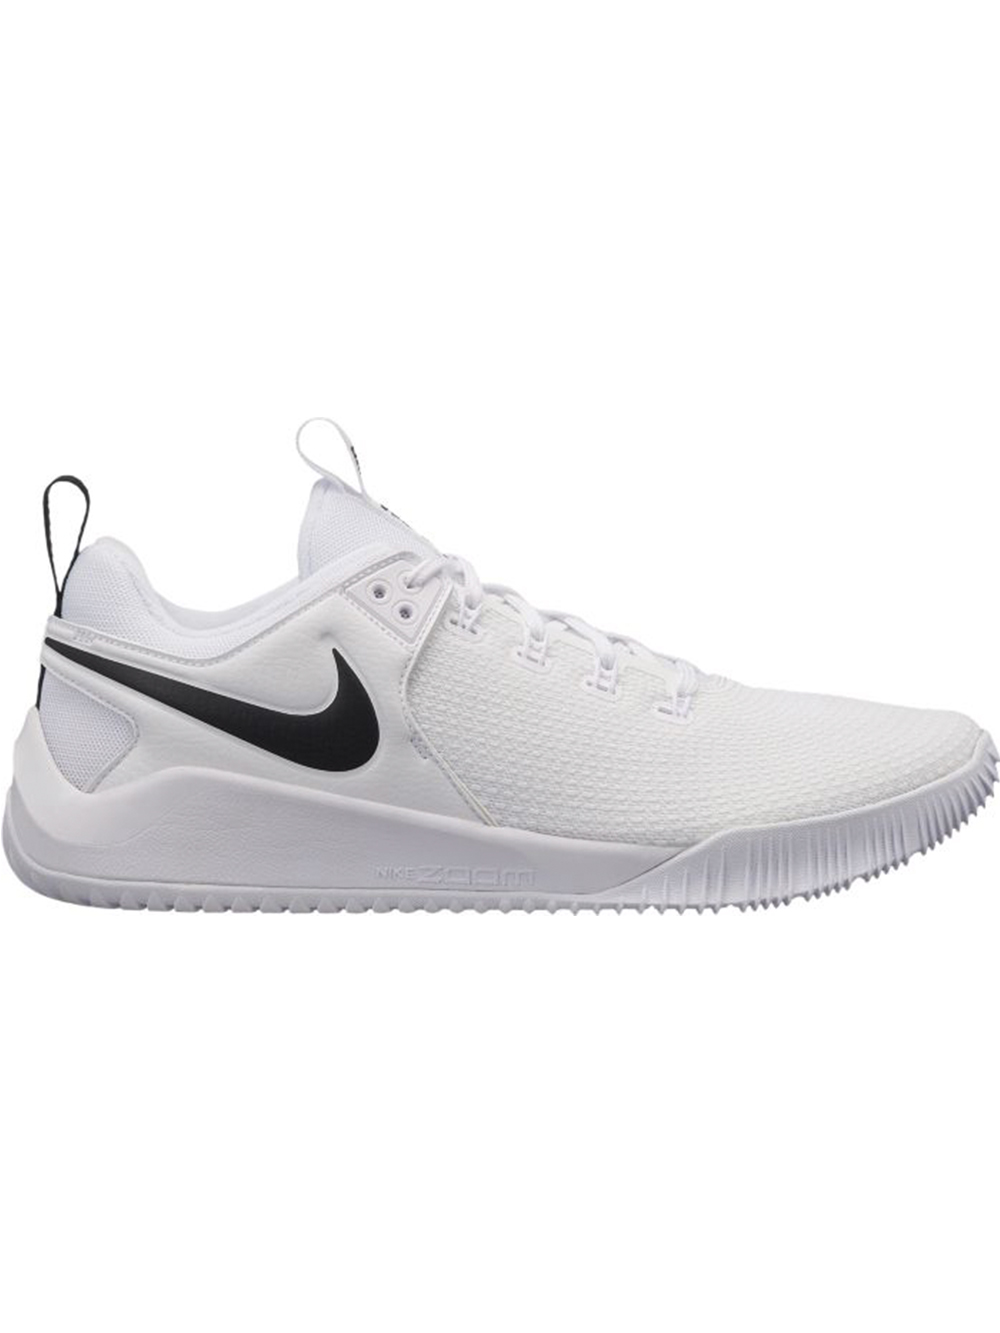 nike air zoom hyperace 2 volleyball shoe